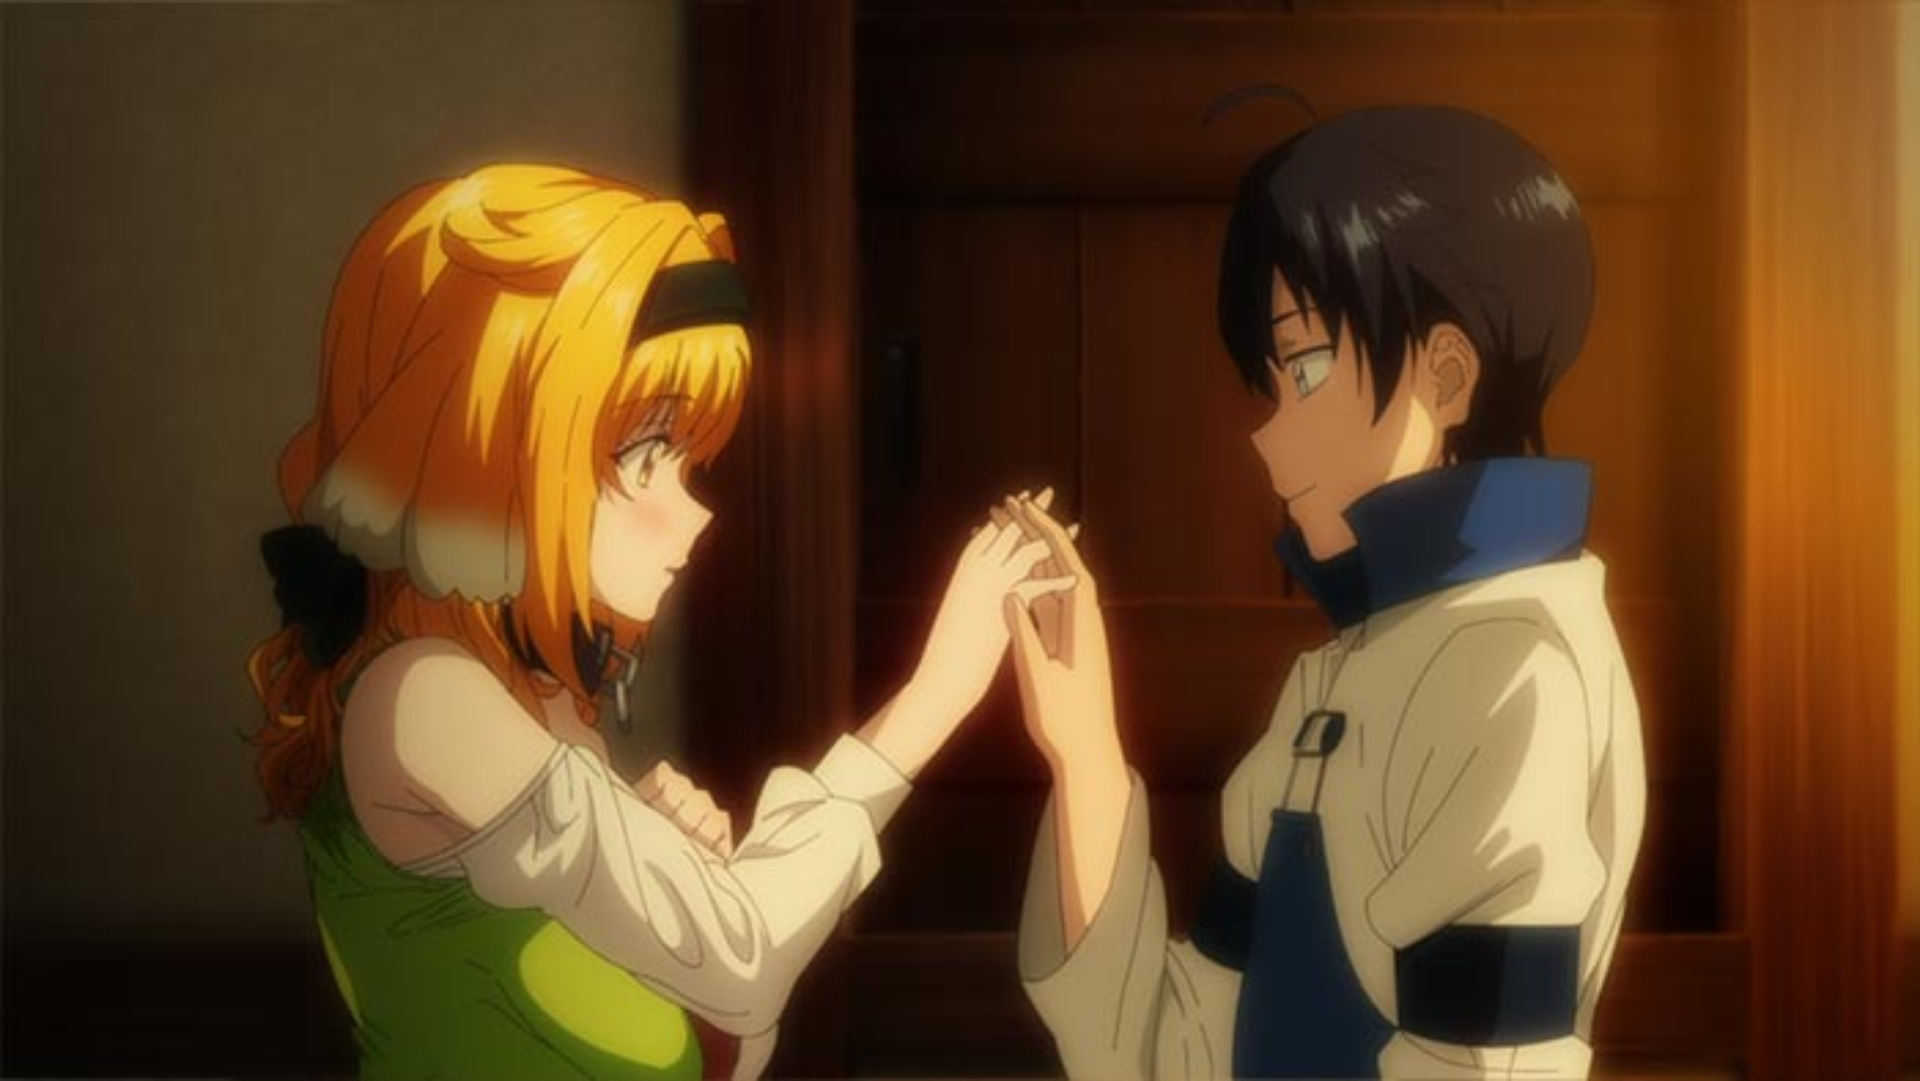 Harem in the Labyrinth of Another World Episode 2 Preview Released